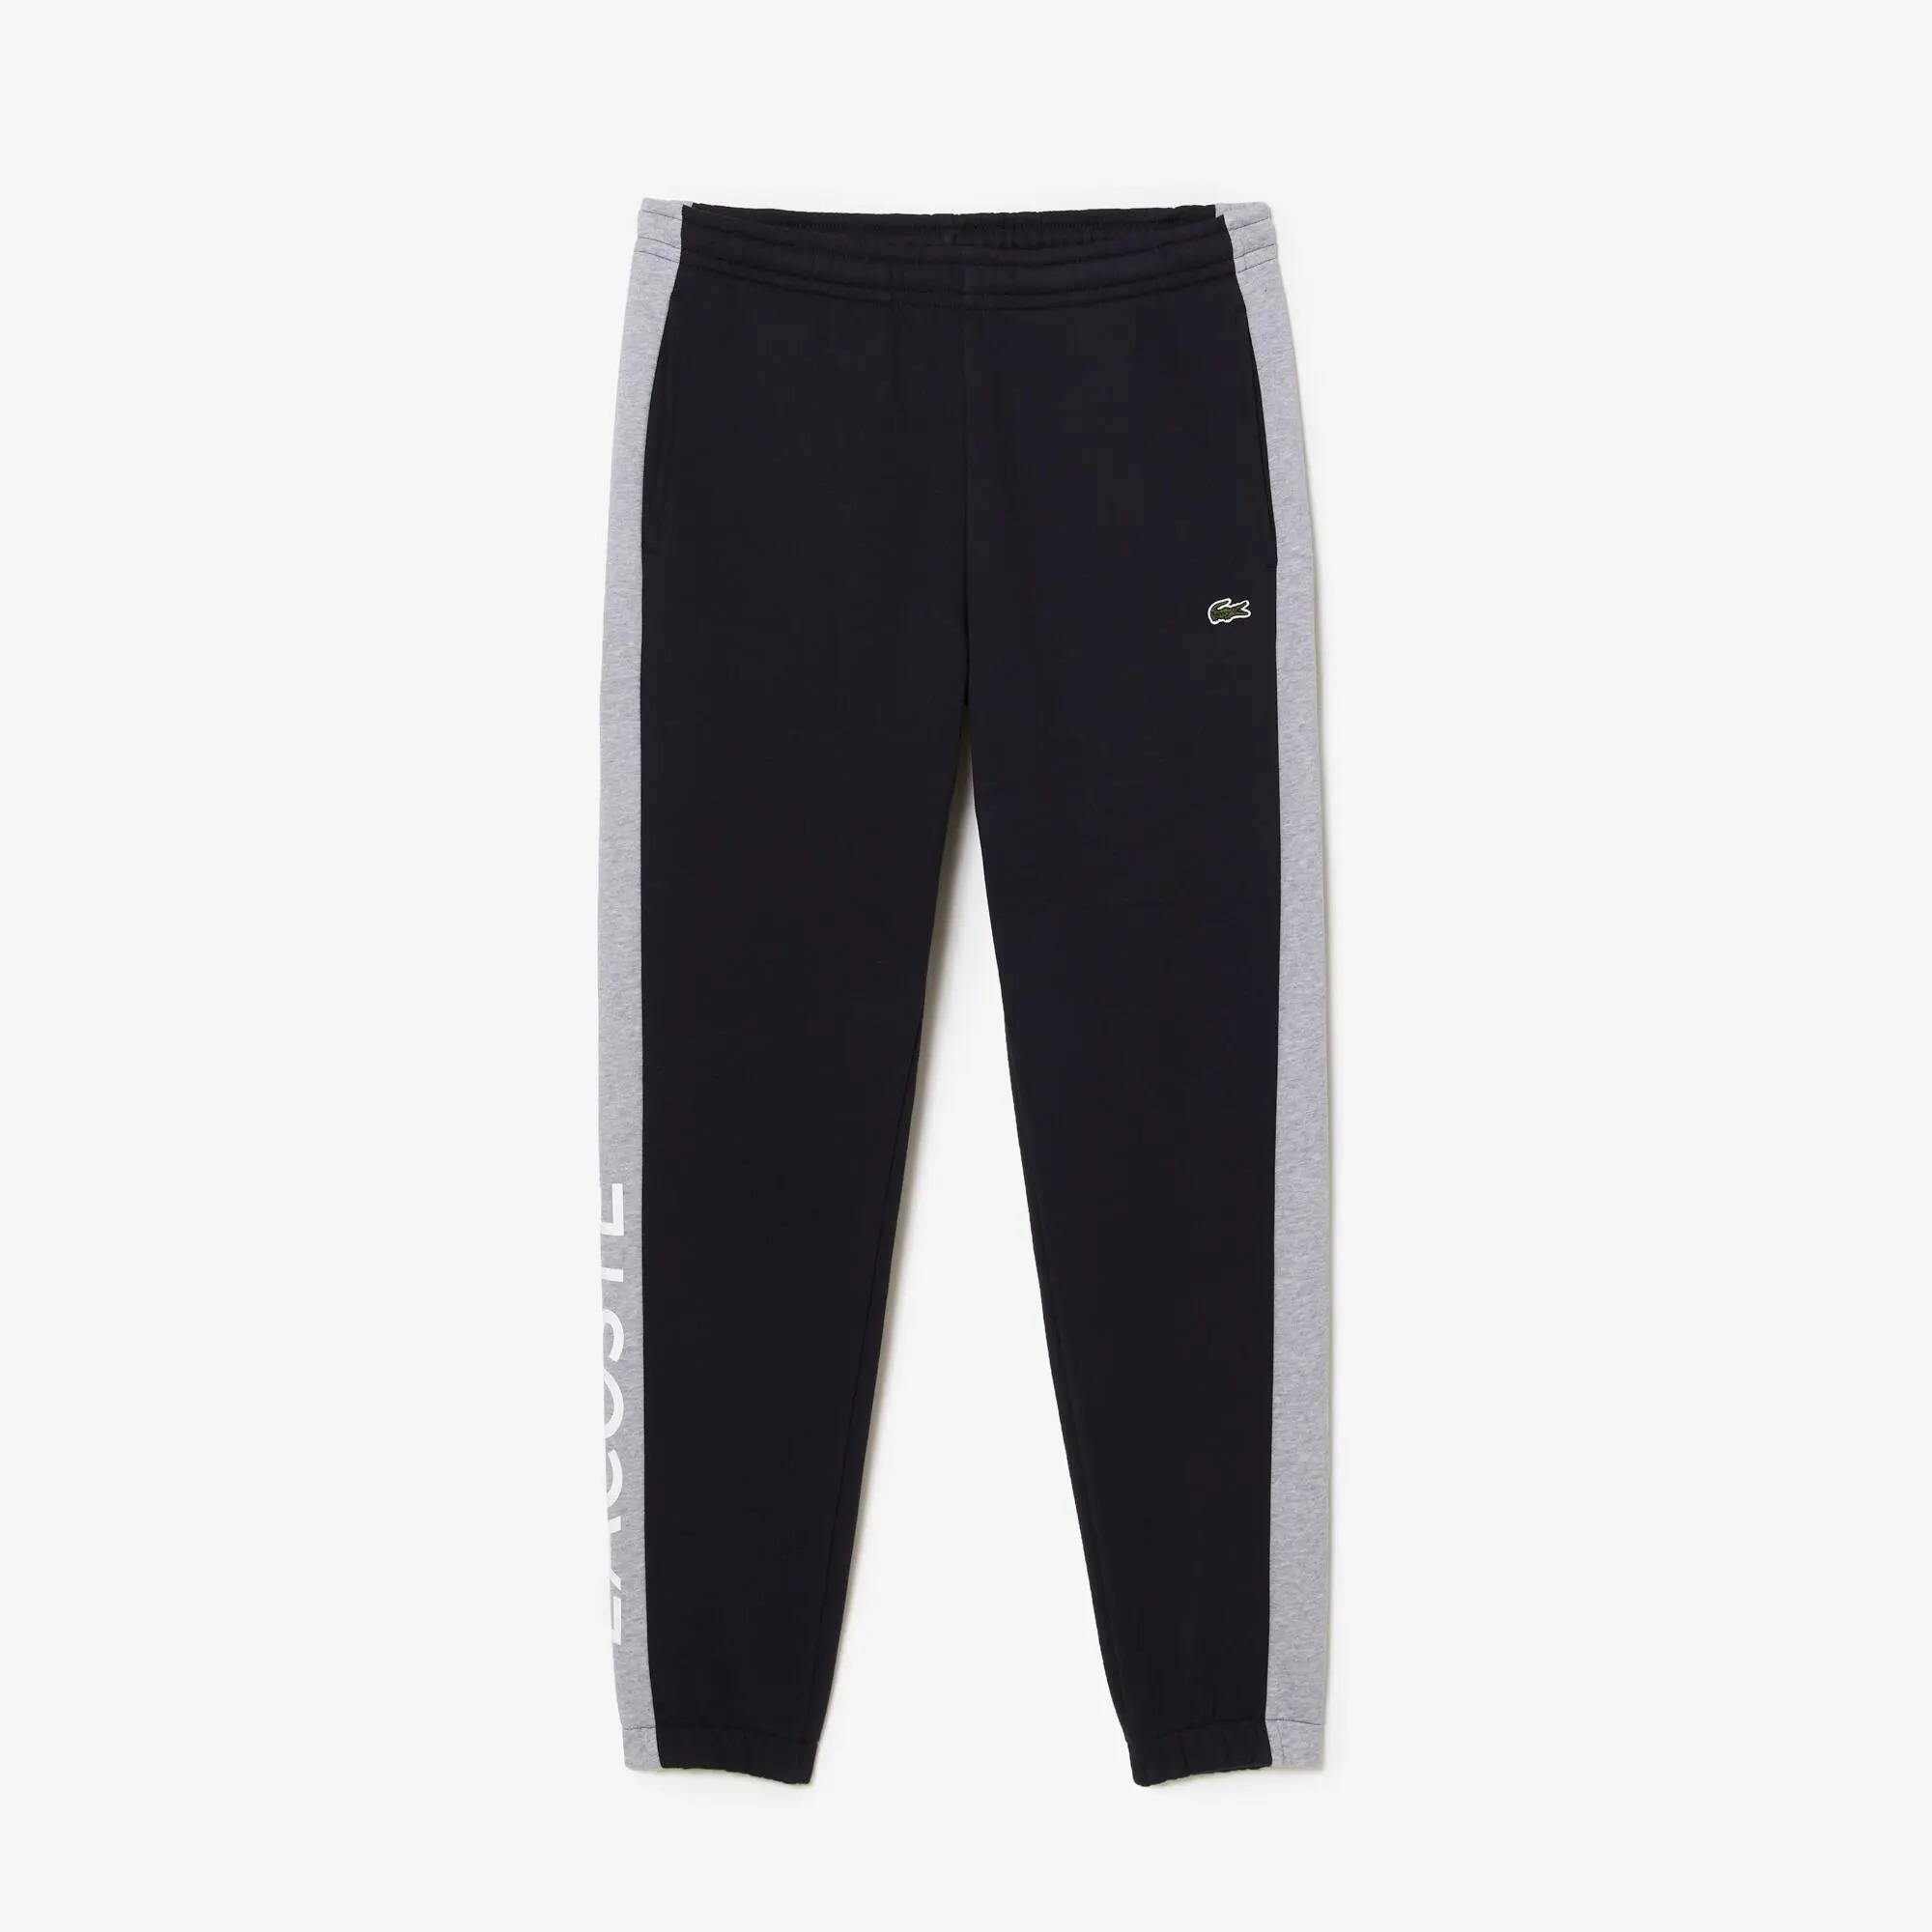 Lacoste Men’s Track Pants with Branding and Contrast Stripe Detail. 2